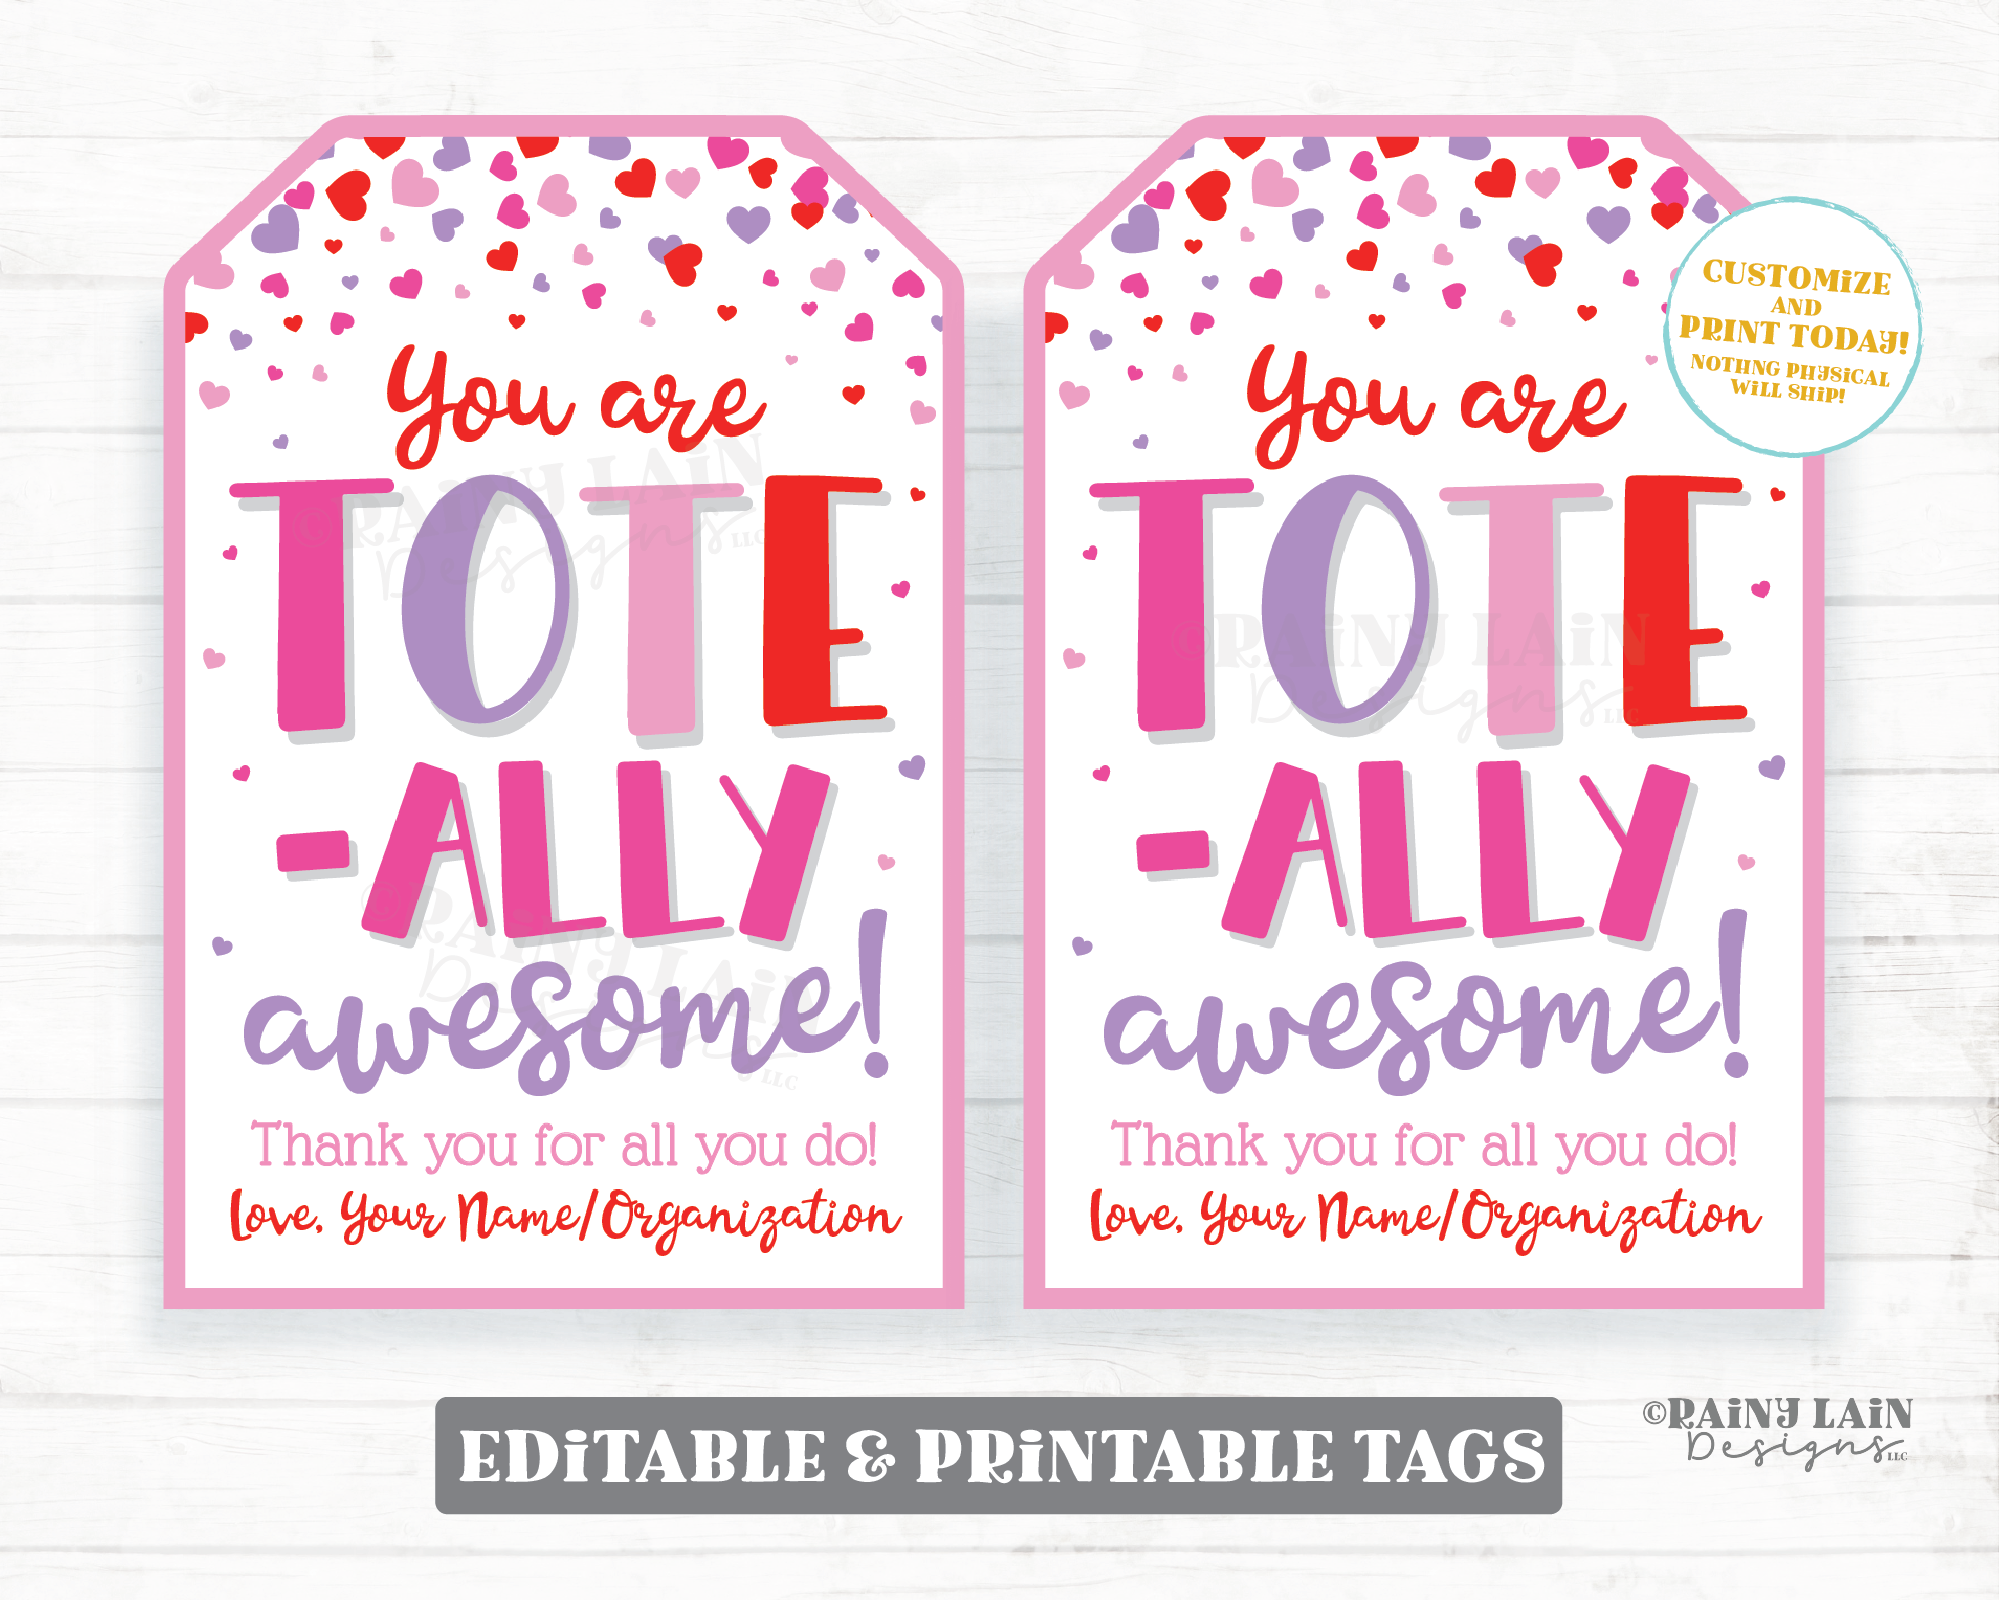 Tote-ally Awesome Valentine Tag Tote Bag Reusable Bag Valentine's Day Gift Grocery Employee Friend Co-Worker Staff Teacher PTO Printable